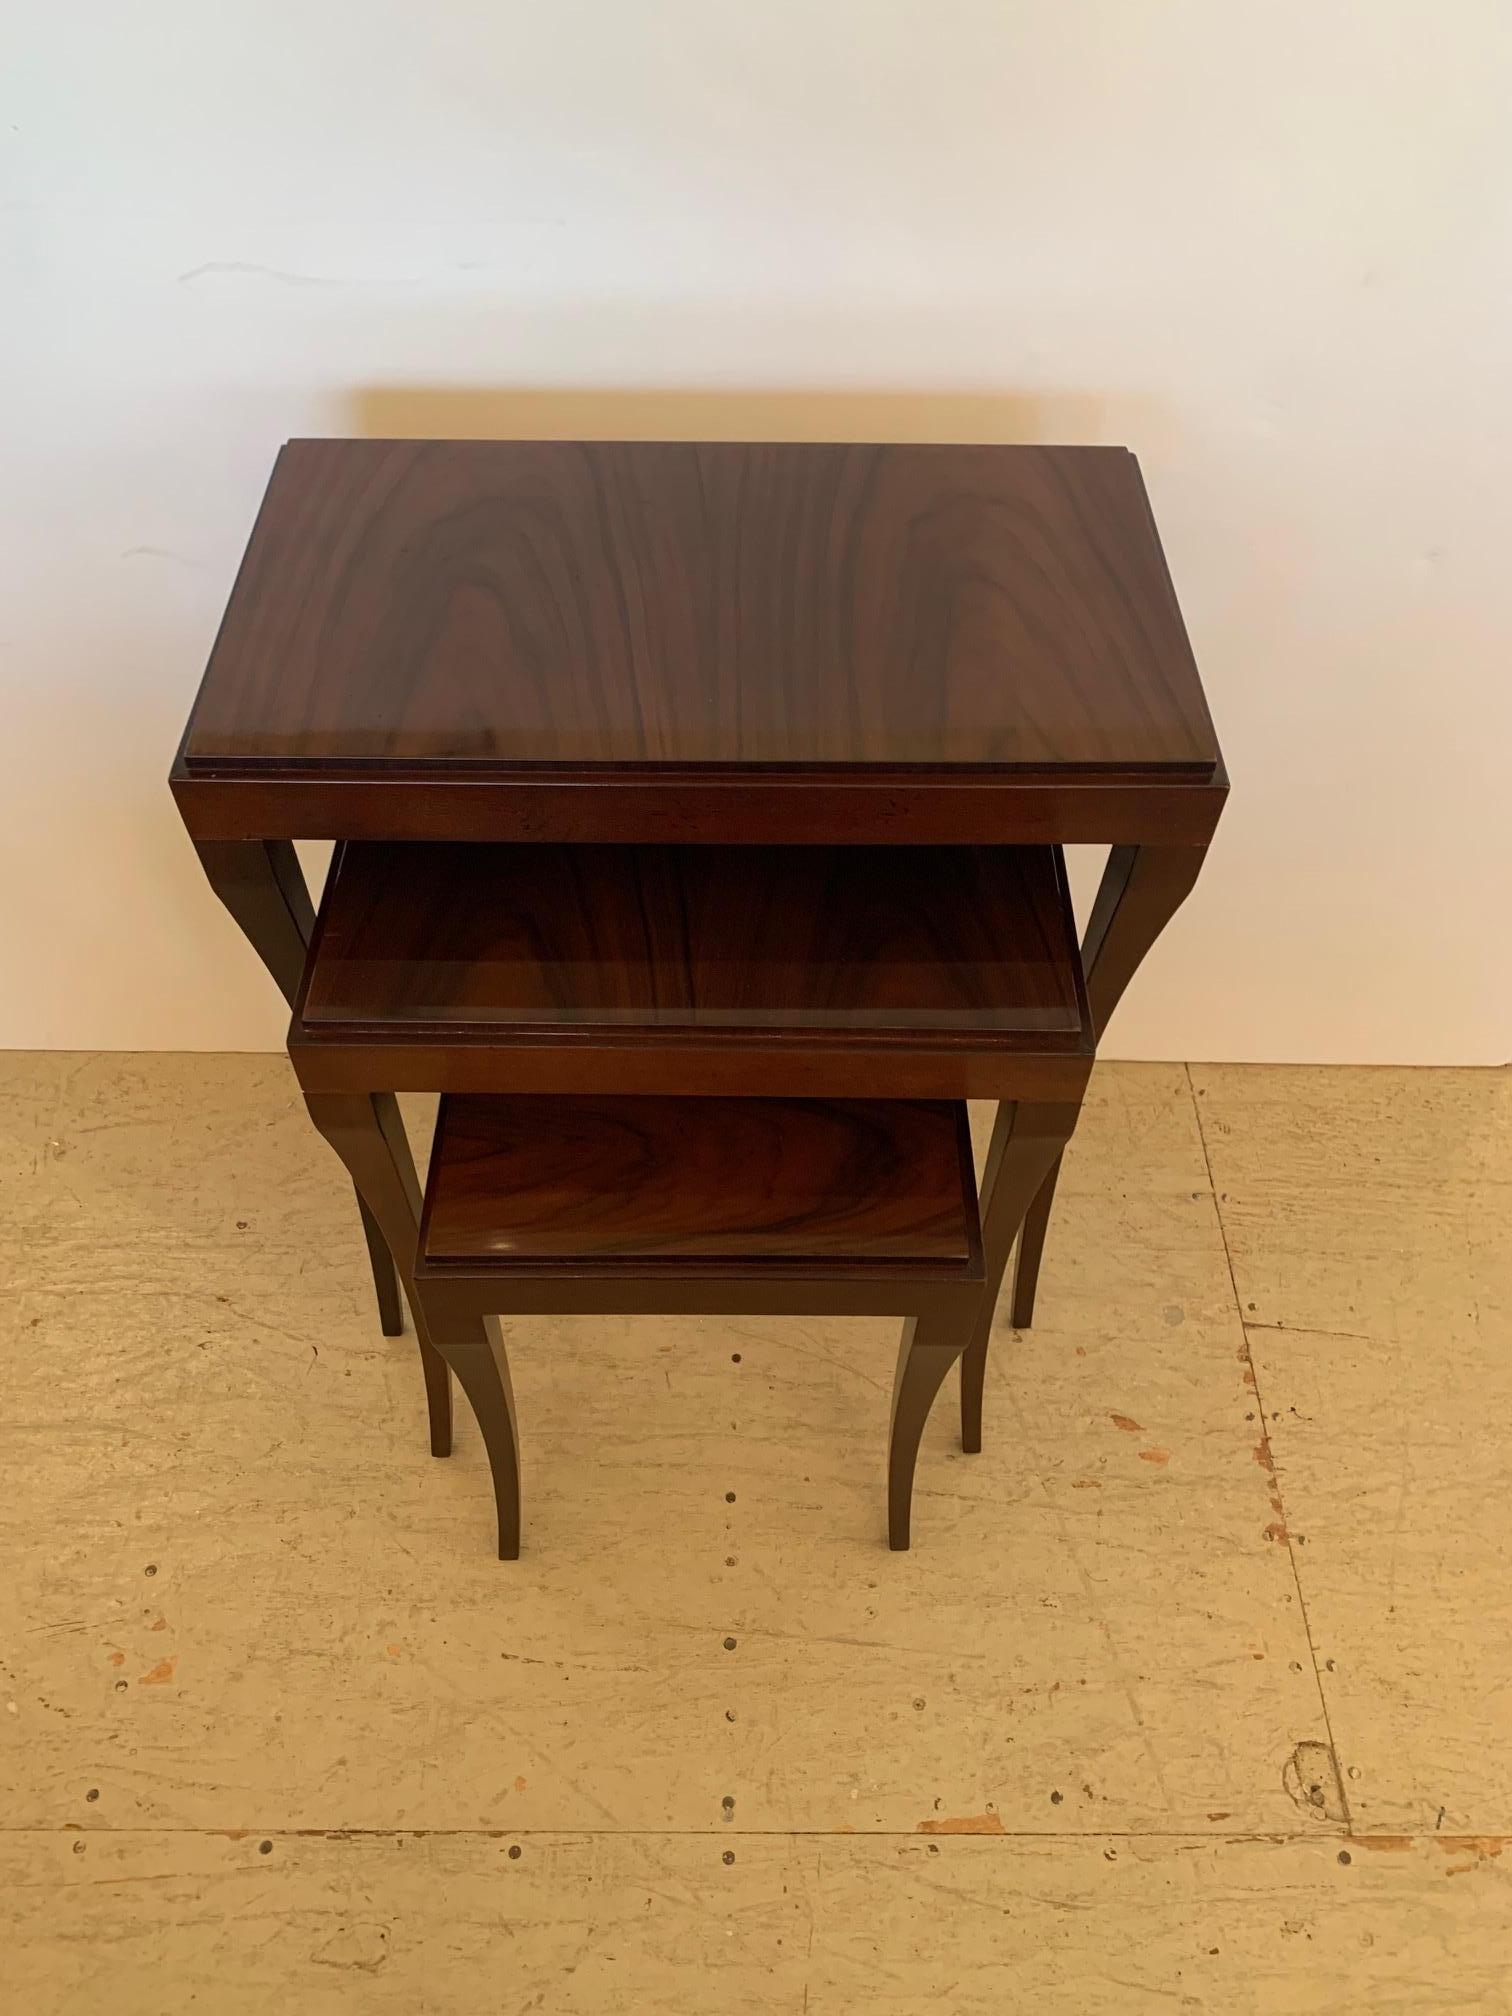 Lovely Sleek Glossy Set of Nesting Tables by Baker In Good Condition For Sale In Hopewell, NJ